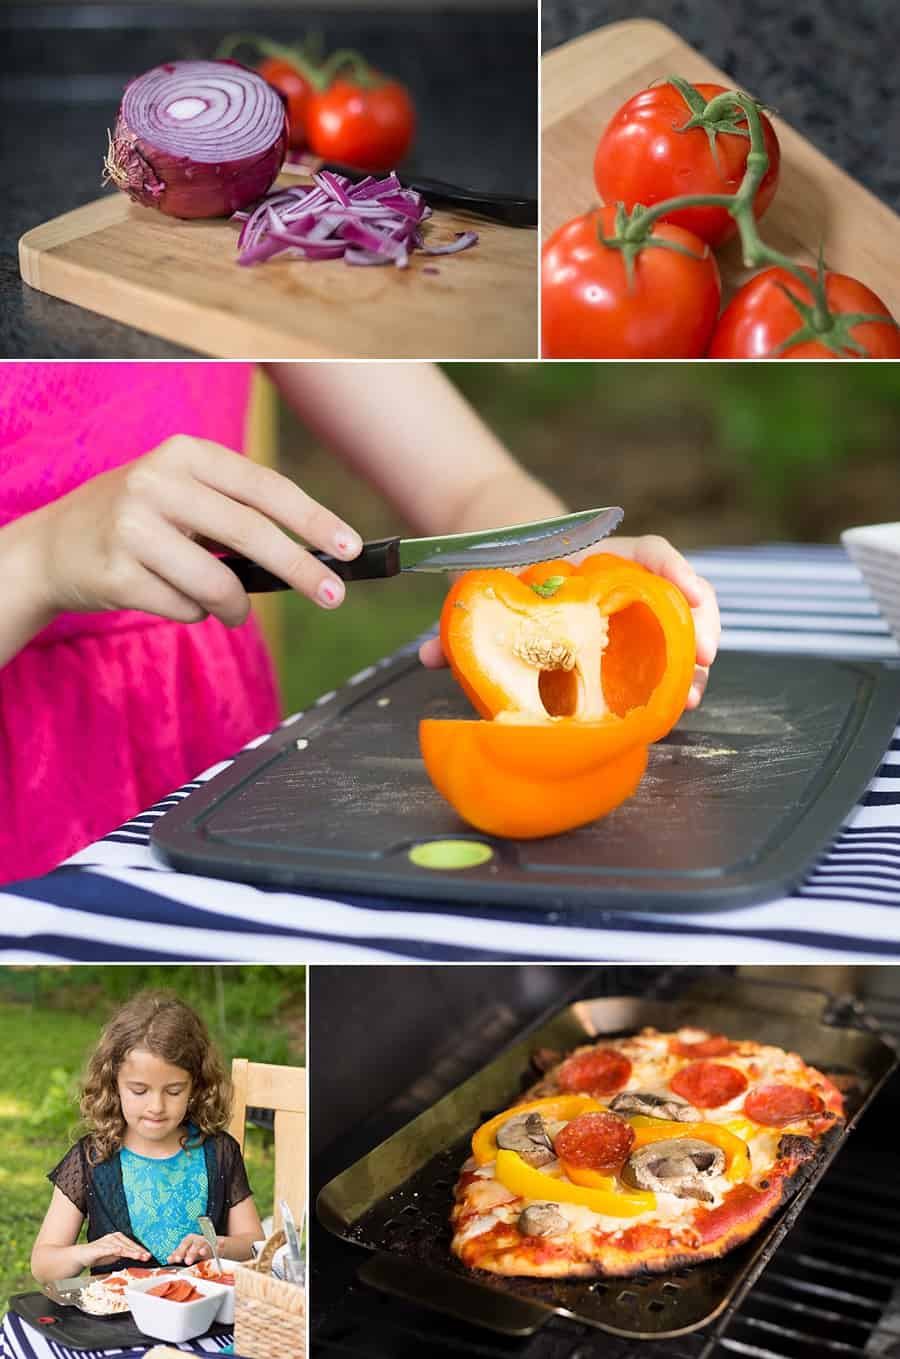 Grilled Pizza 101: This Simple Grilled Pizza Hack is Insanely Delicious *Love this easy idea and recipe. My husband and kid love these topping combos.